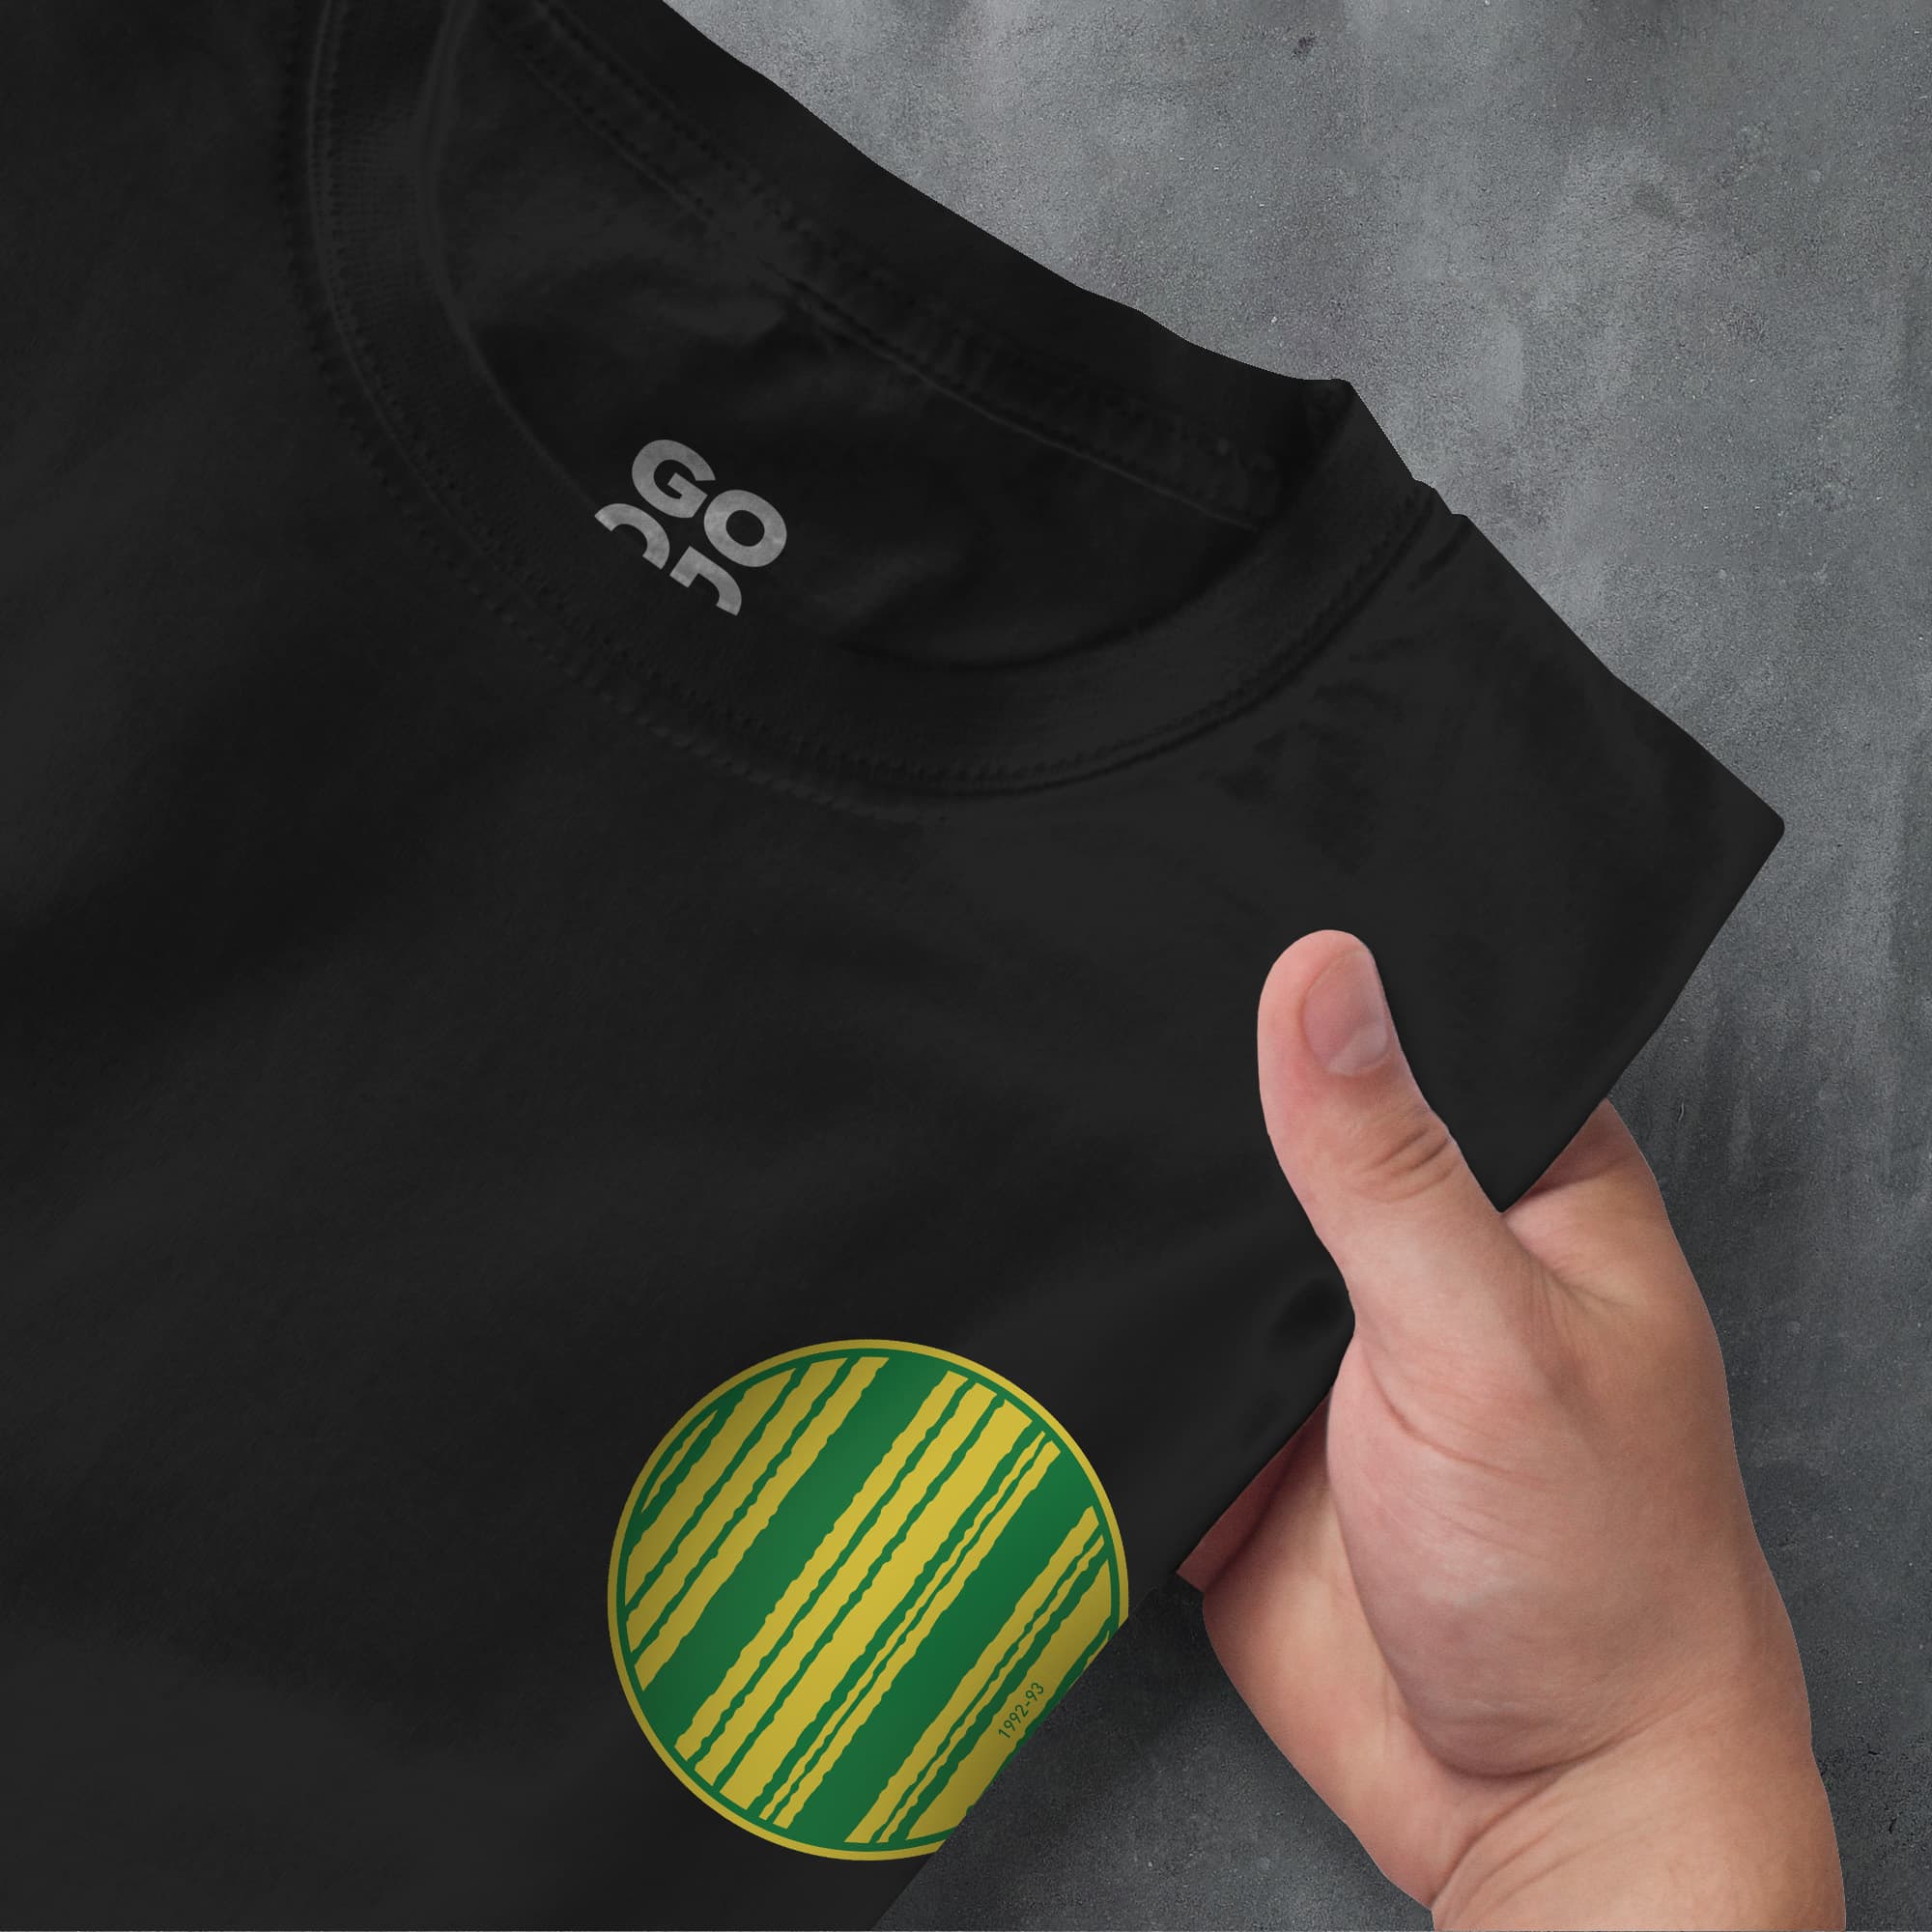 a person pointing at a black shirt with green and yellow stripes